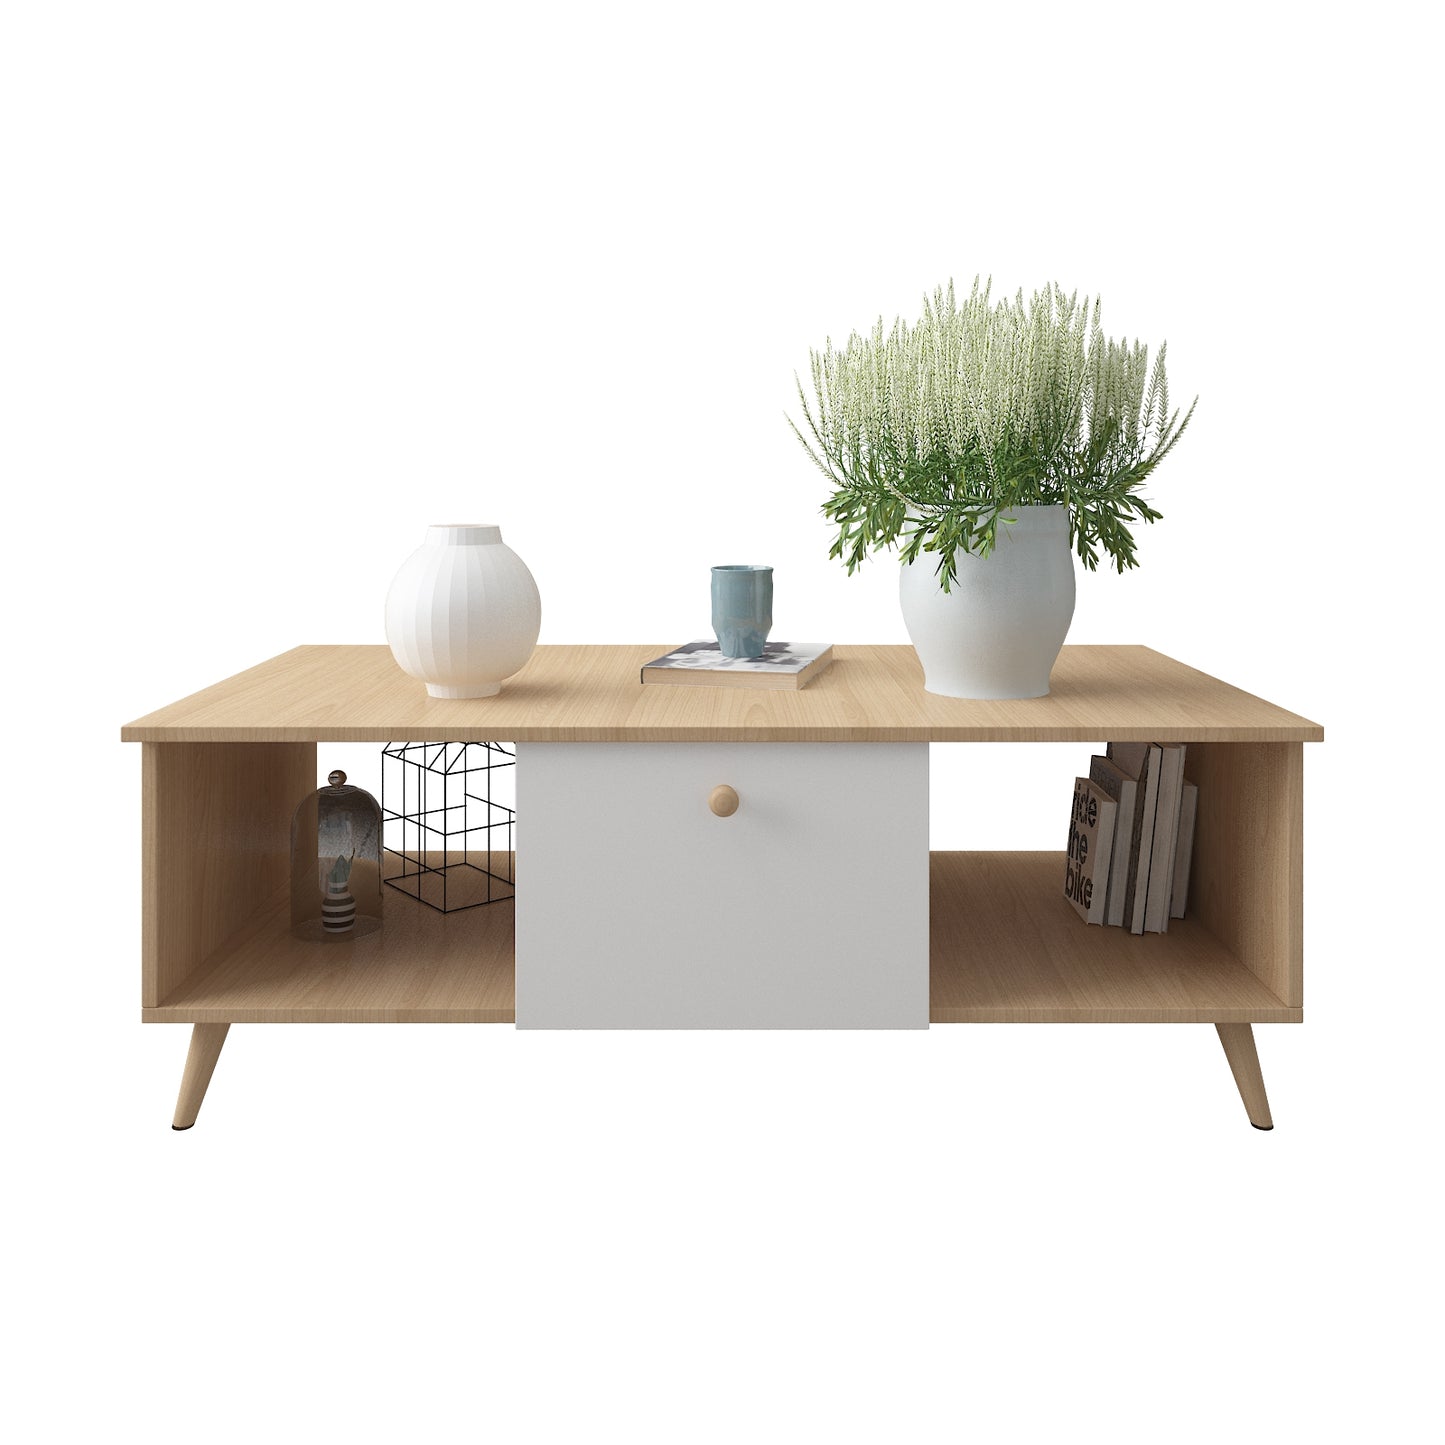 Modern Wooden Natural and White Coffee Table Storage Shelf Drawer 2 Open Side Shelves 120cm